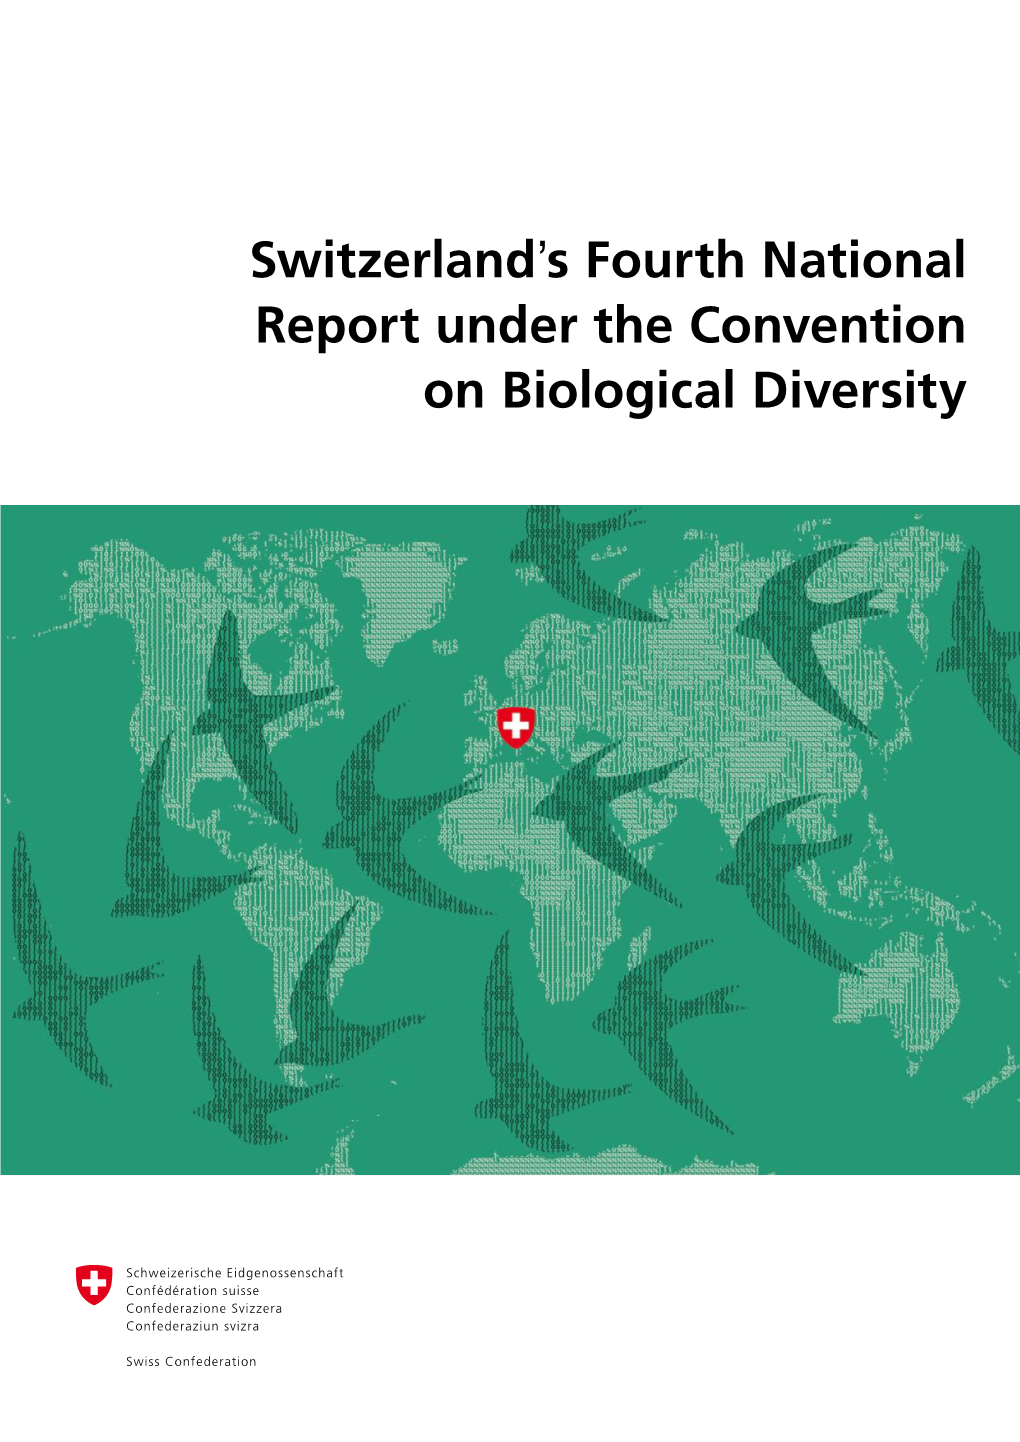 Switzerland's Fourth National Report Under the Convention on Biological Diversity, Bern, 148 Pp